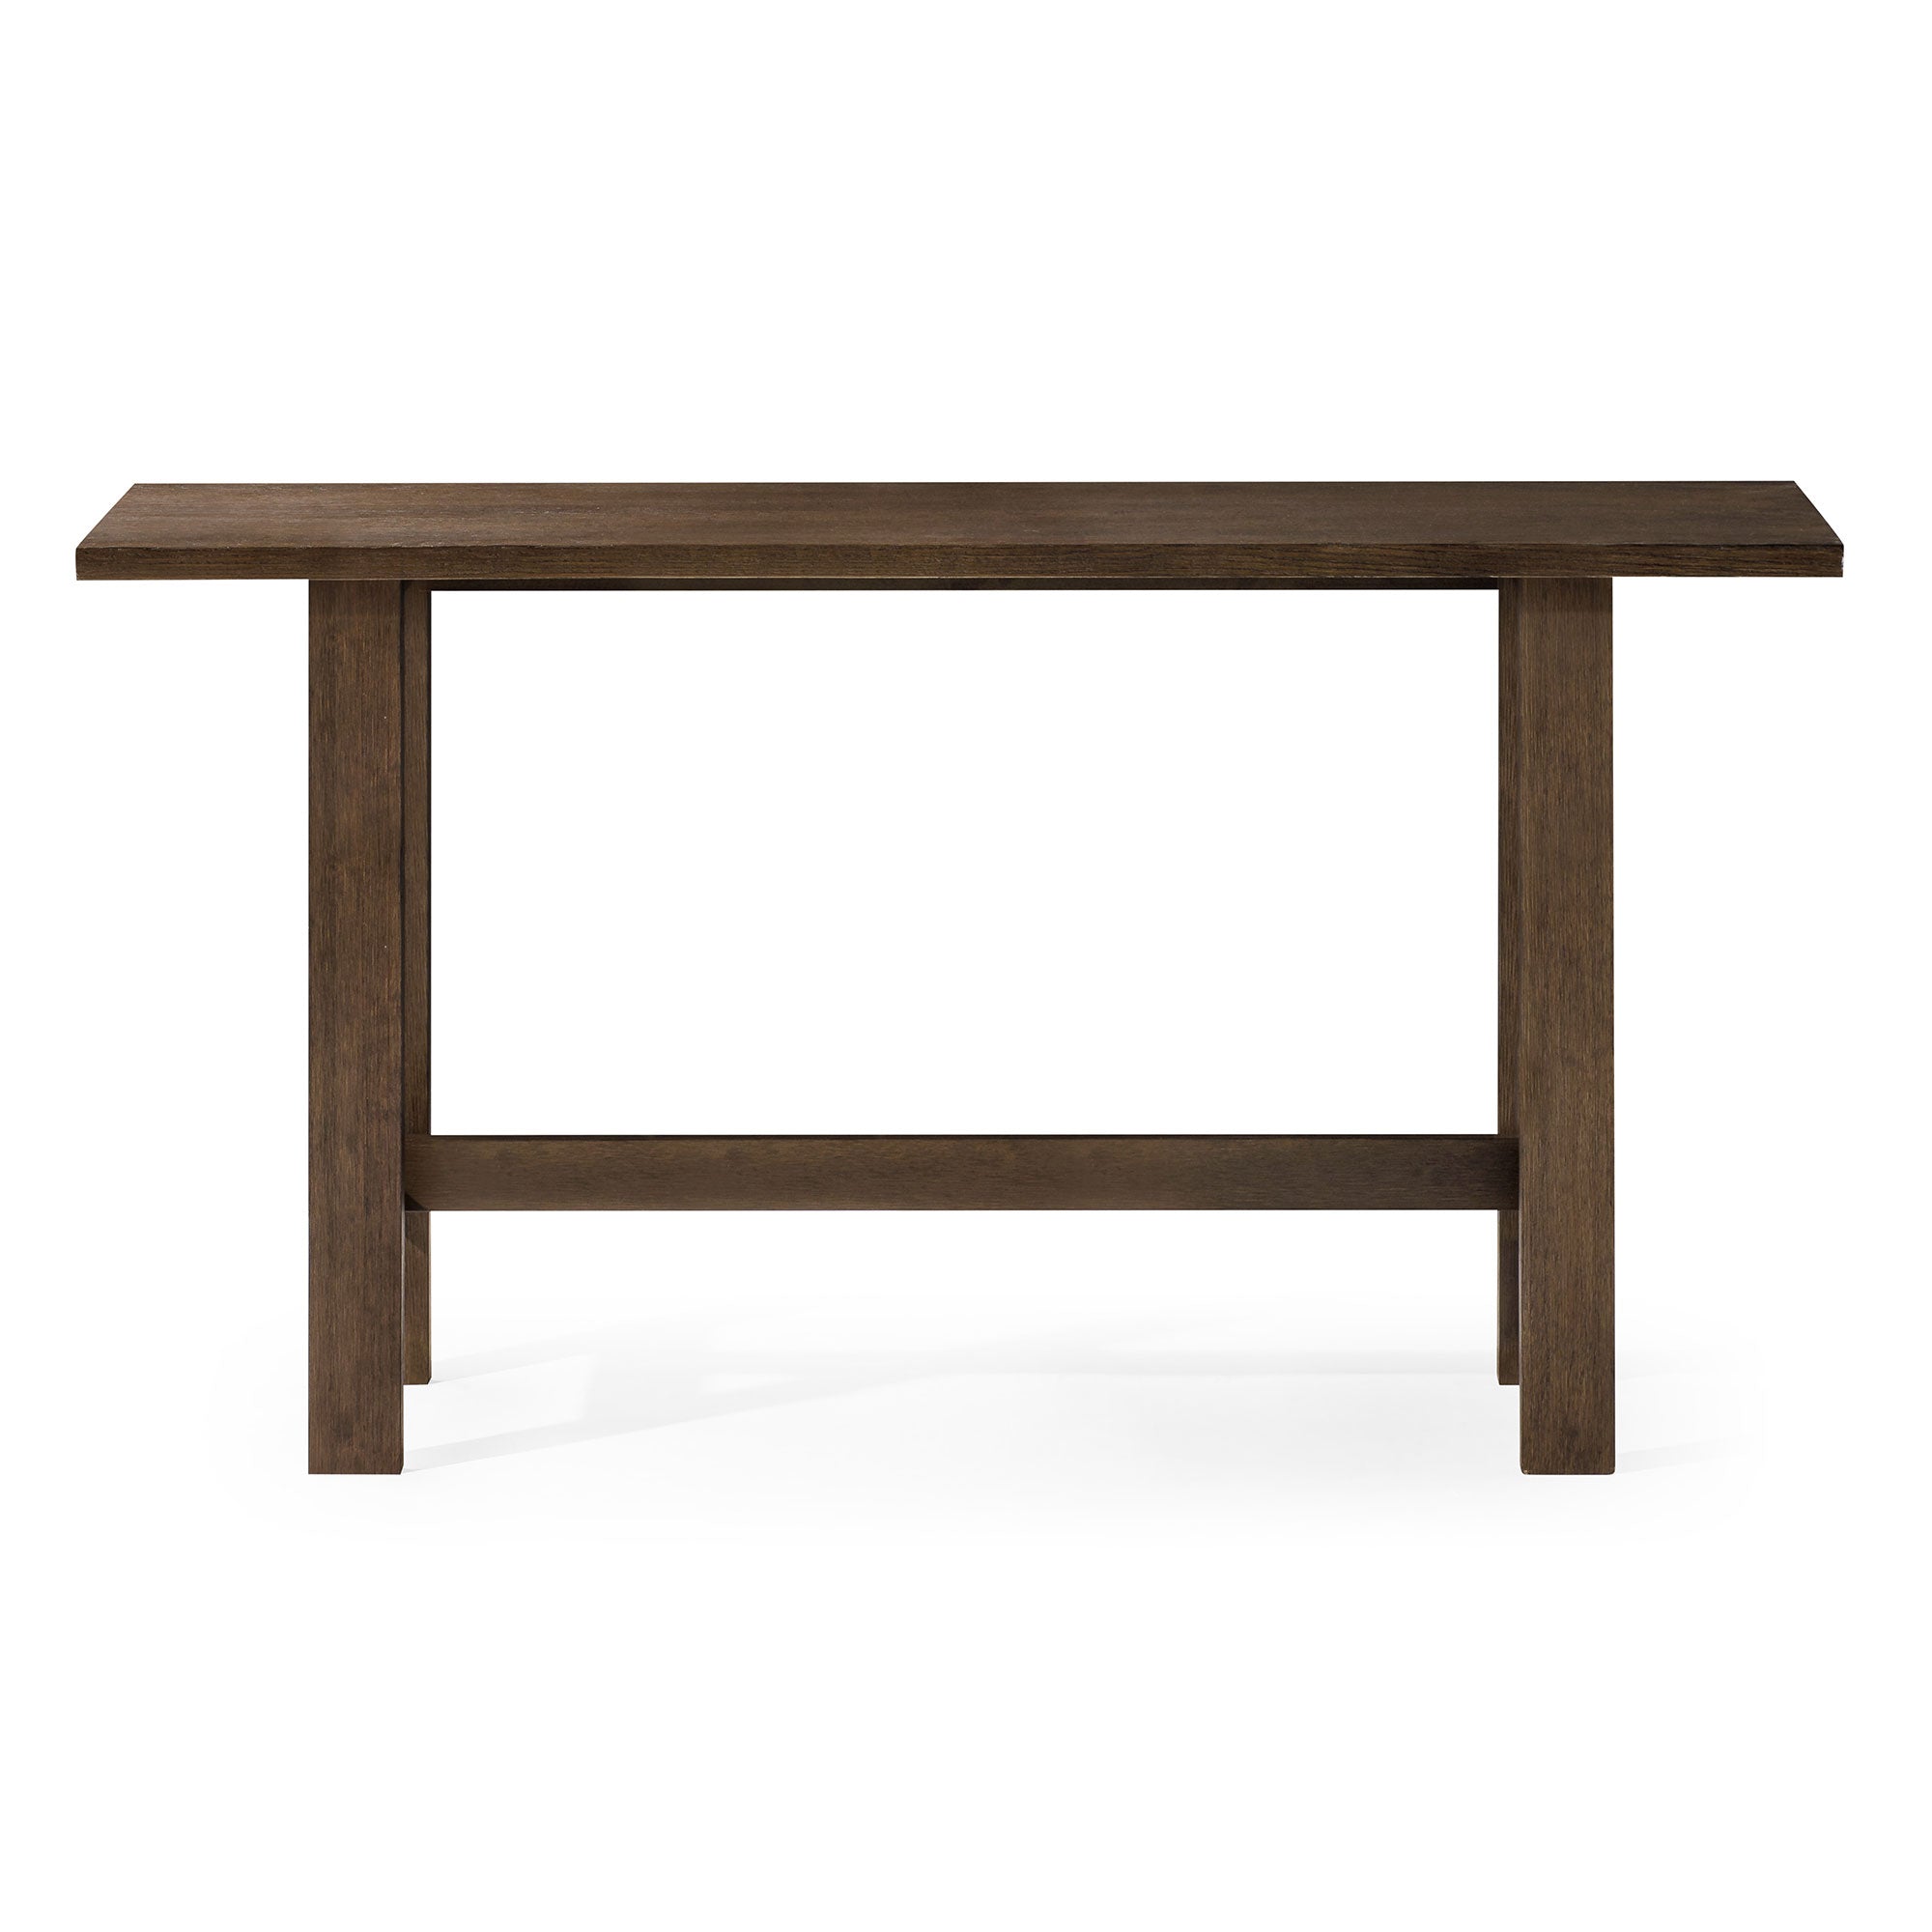 Hera Modern Wooden Console Table in Weathered Brown Finish